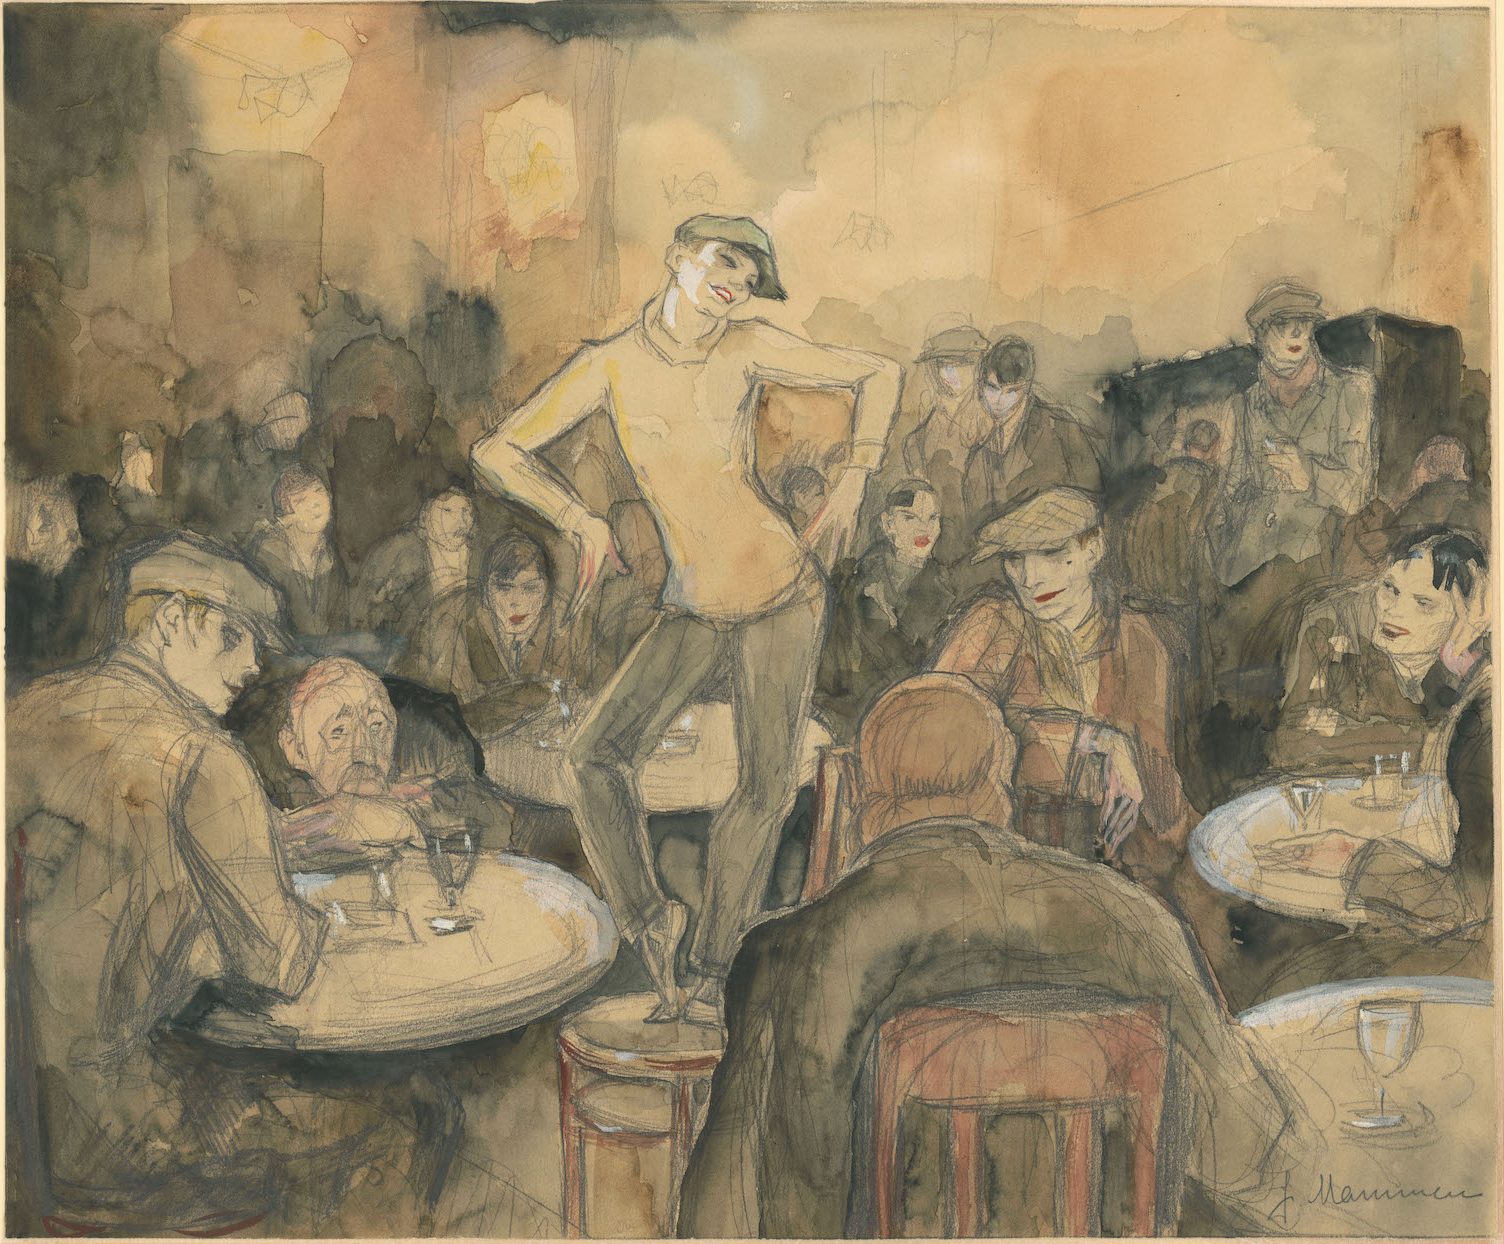 A watercolor of a person dancing on a table in a crowded restaurant